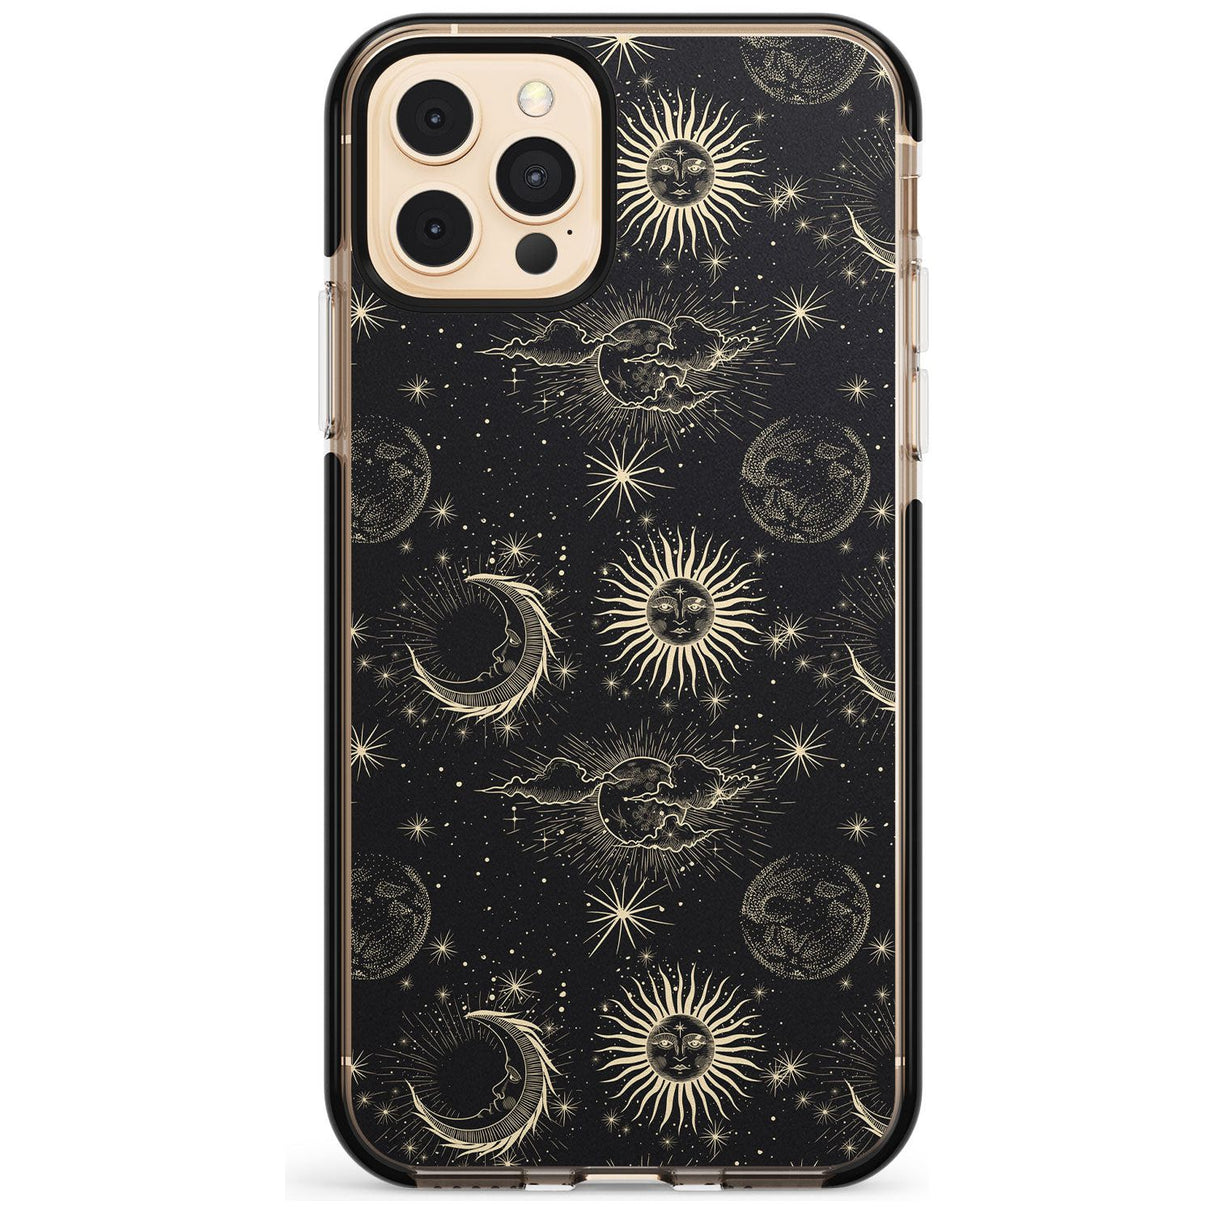 Large Suns, Moons & Clouds Pink Fade Impact Phone Case for iPhone 11